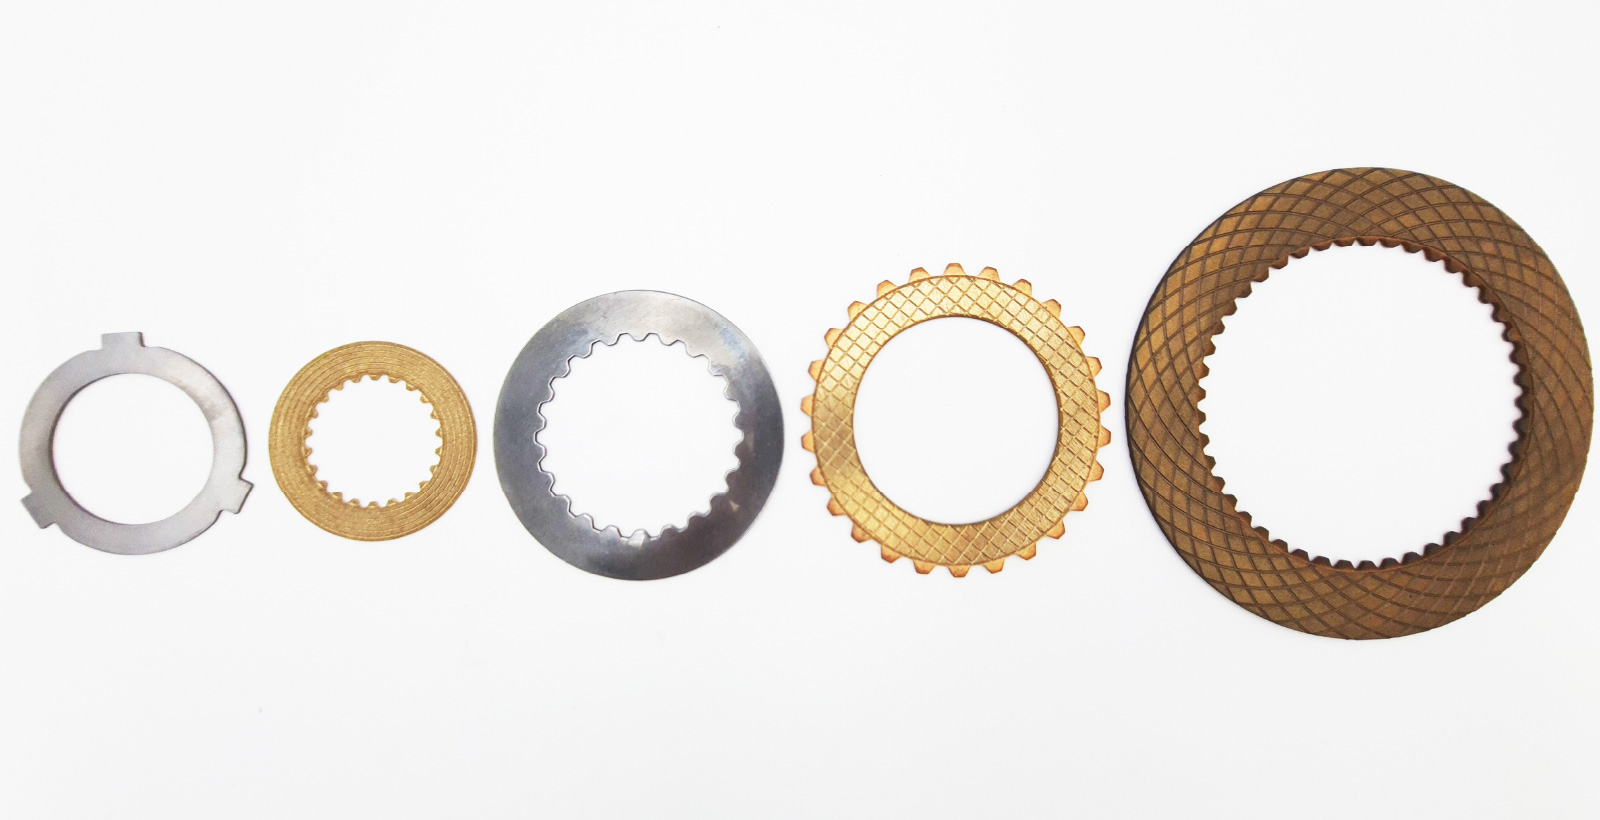 Carbon Transmission Discs for Aerospace Industry